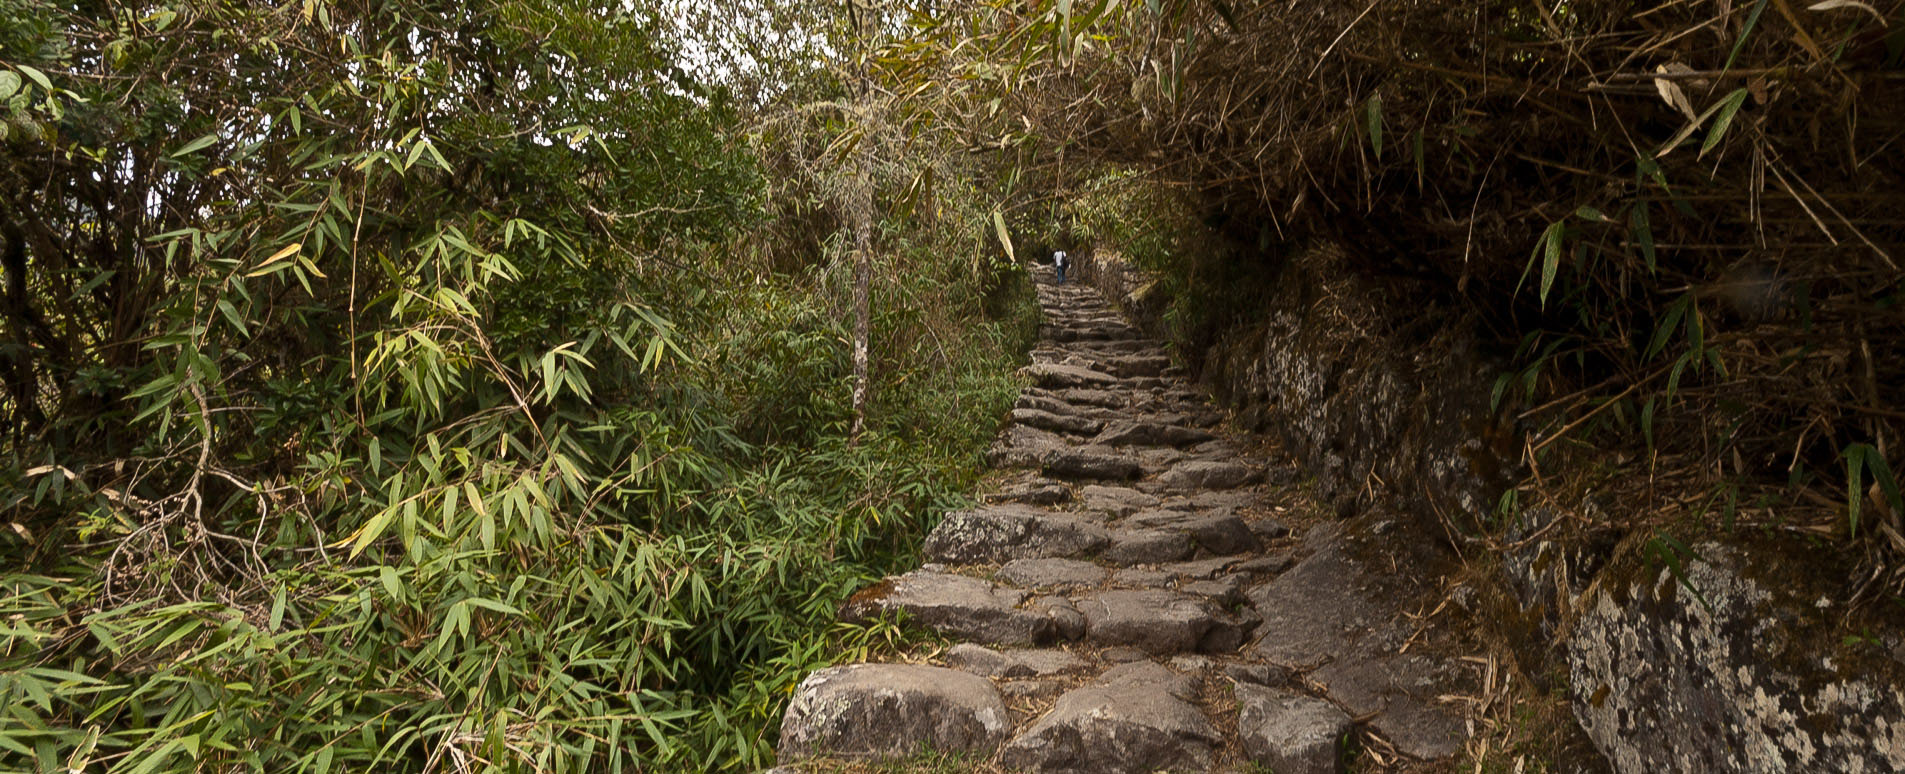 The trail to the Sun Gate